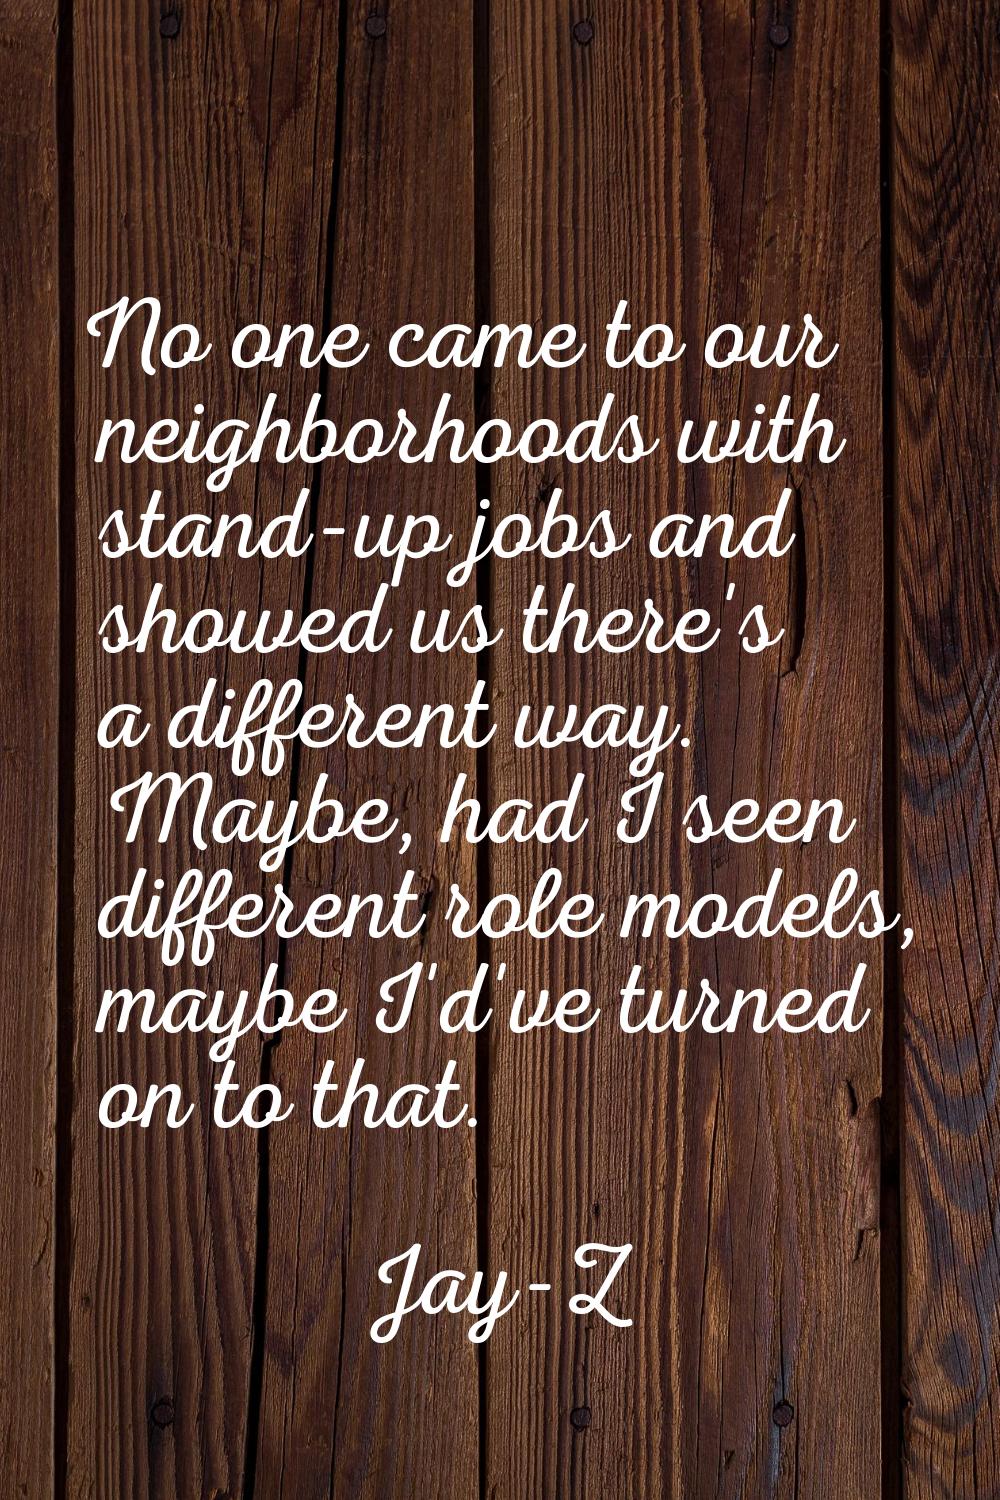 No one came to our neighborhoods with stand-up jobs and showed us there's a different way. Maybe, h